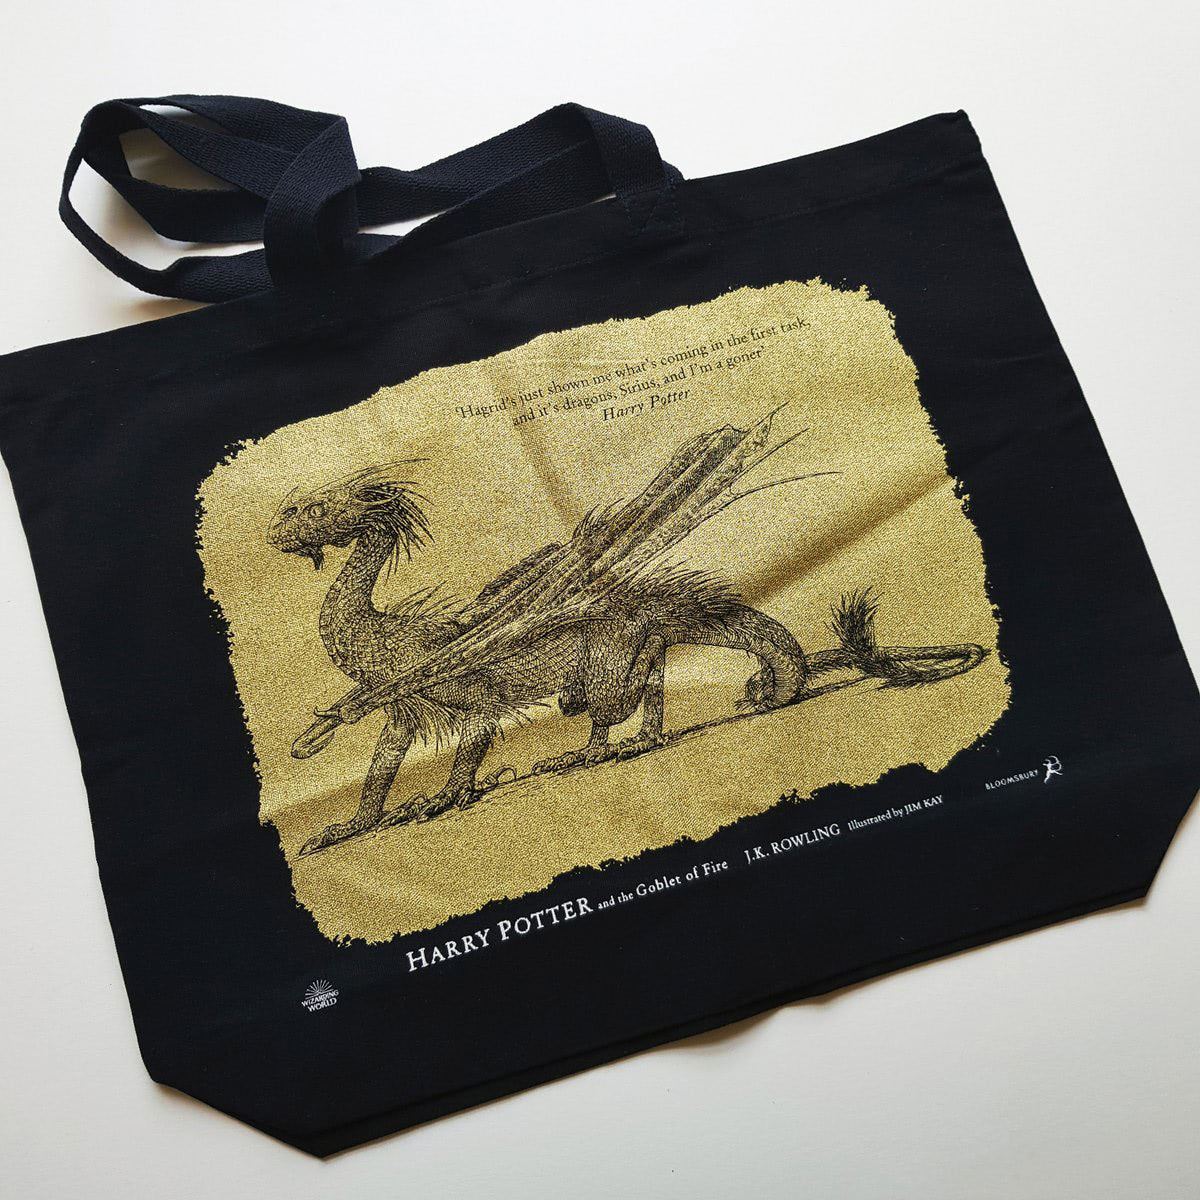 ‘Goblet of Fire’ illustrated edition (deluxe tote bag)